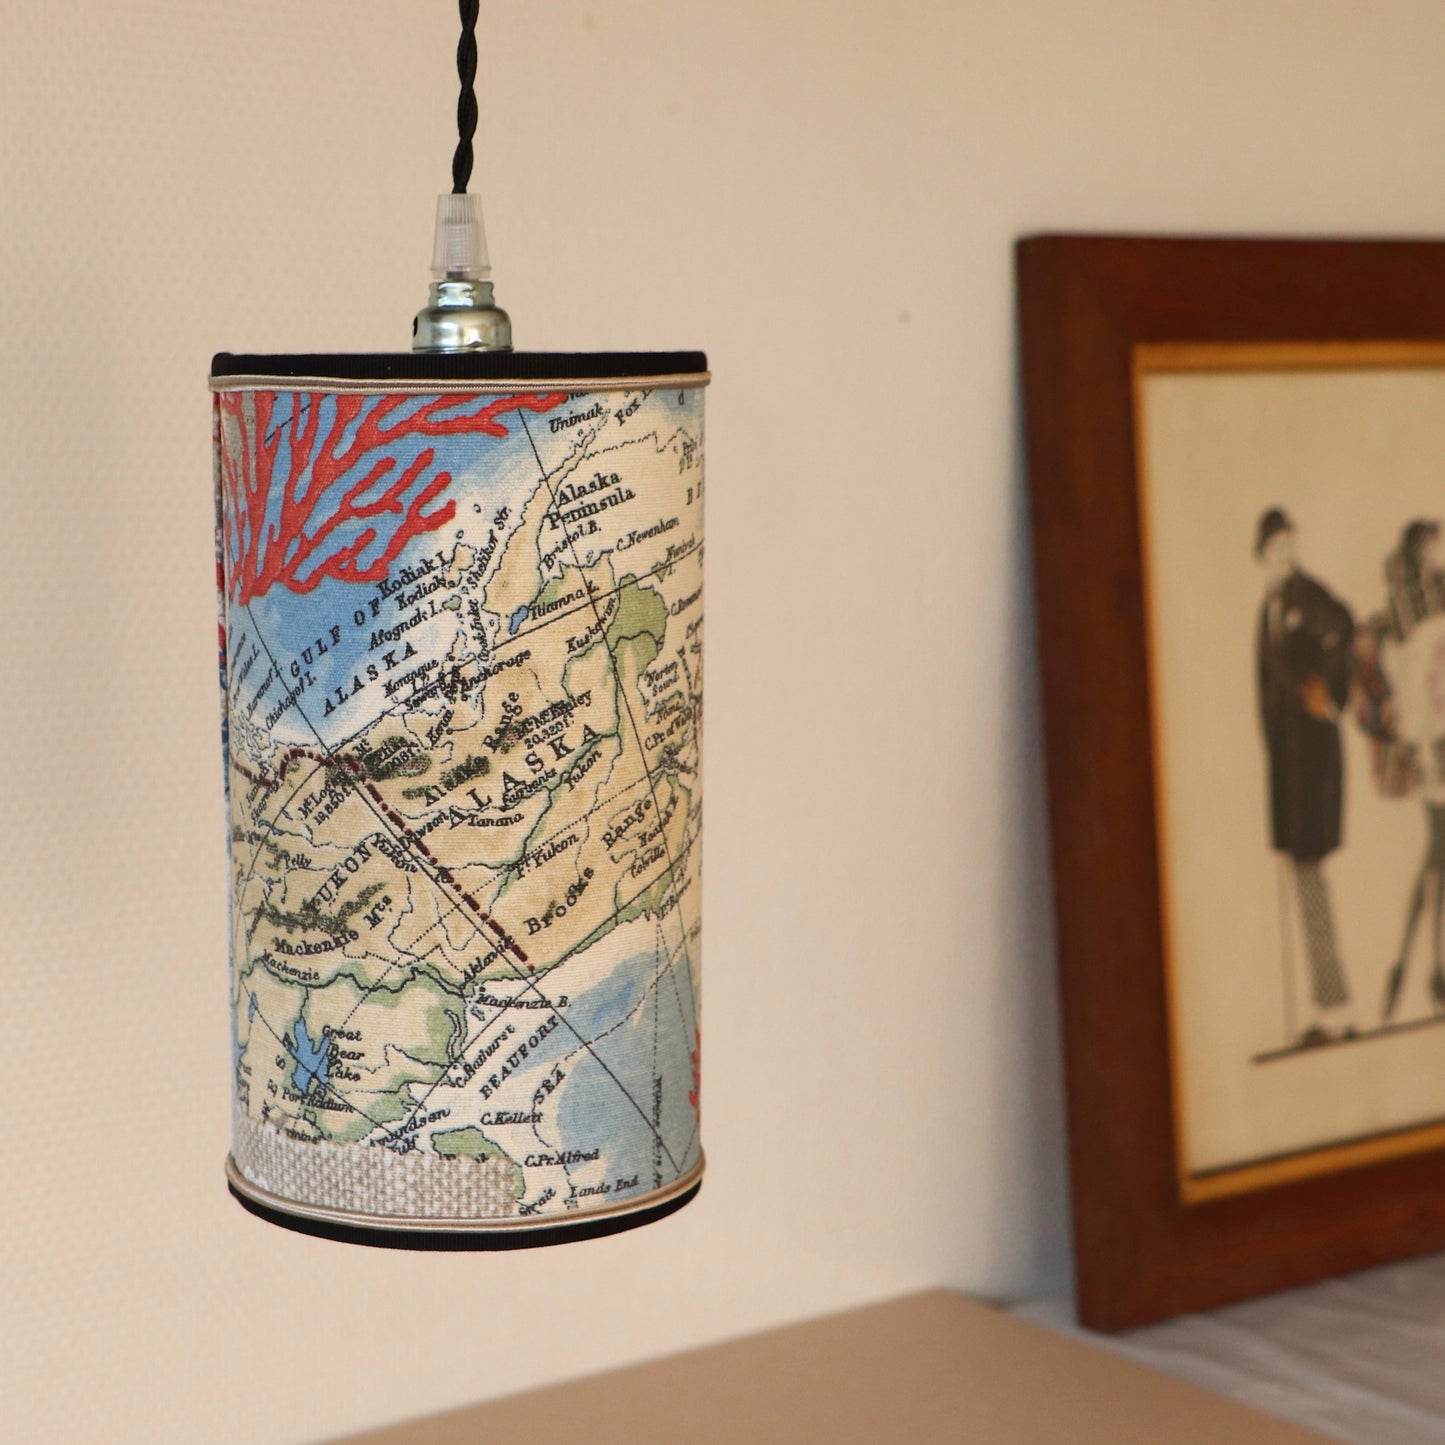 Portable lamp with a laminated lampshade in MAP fabric